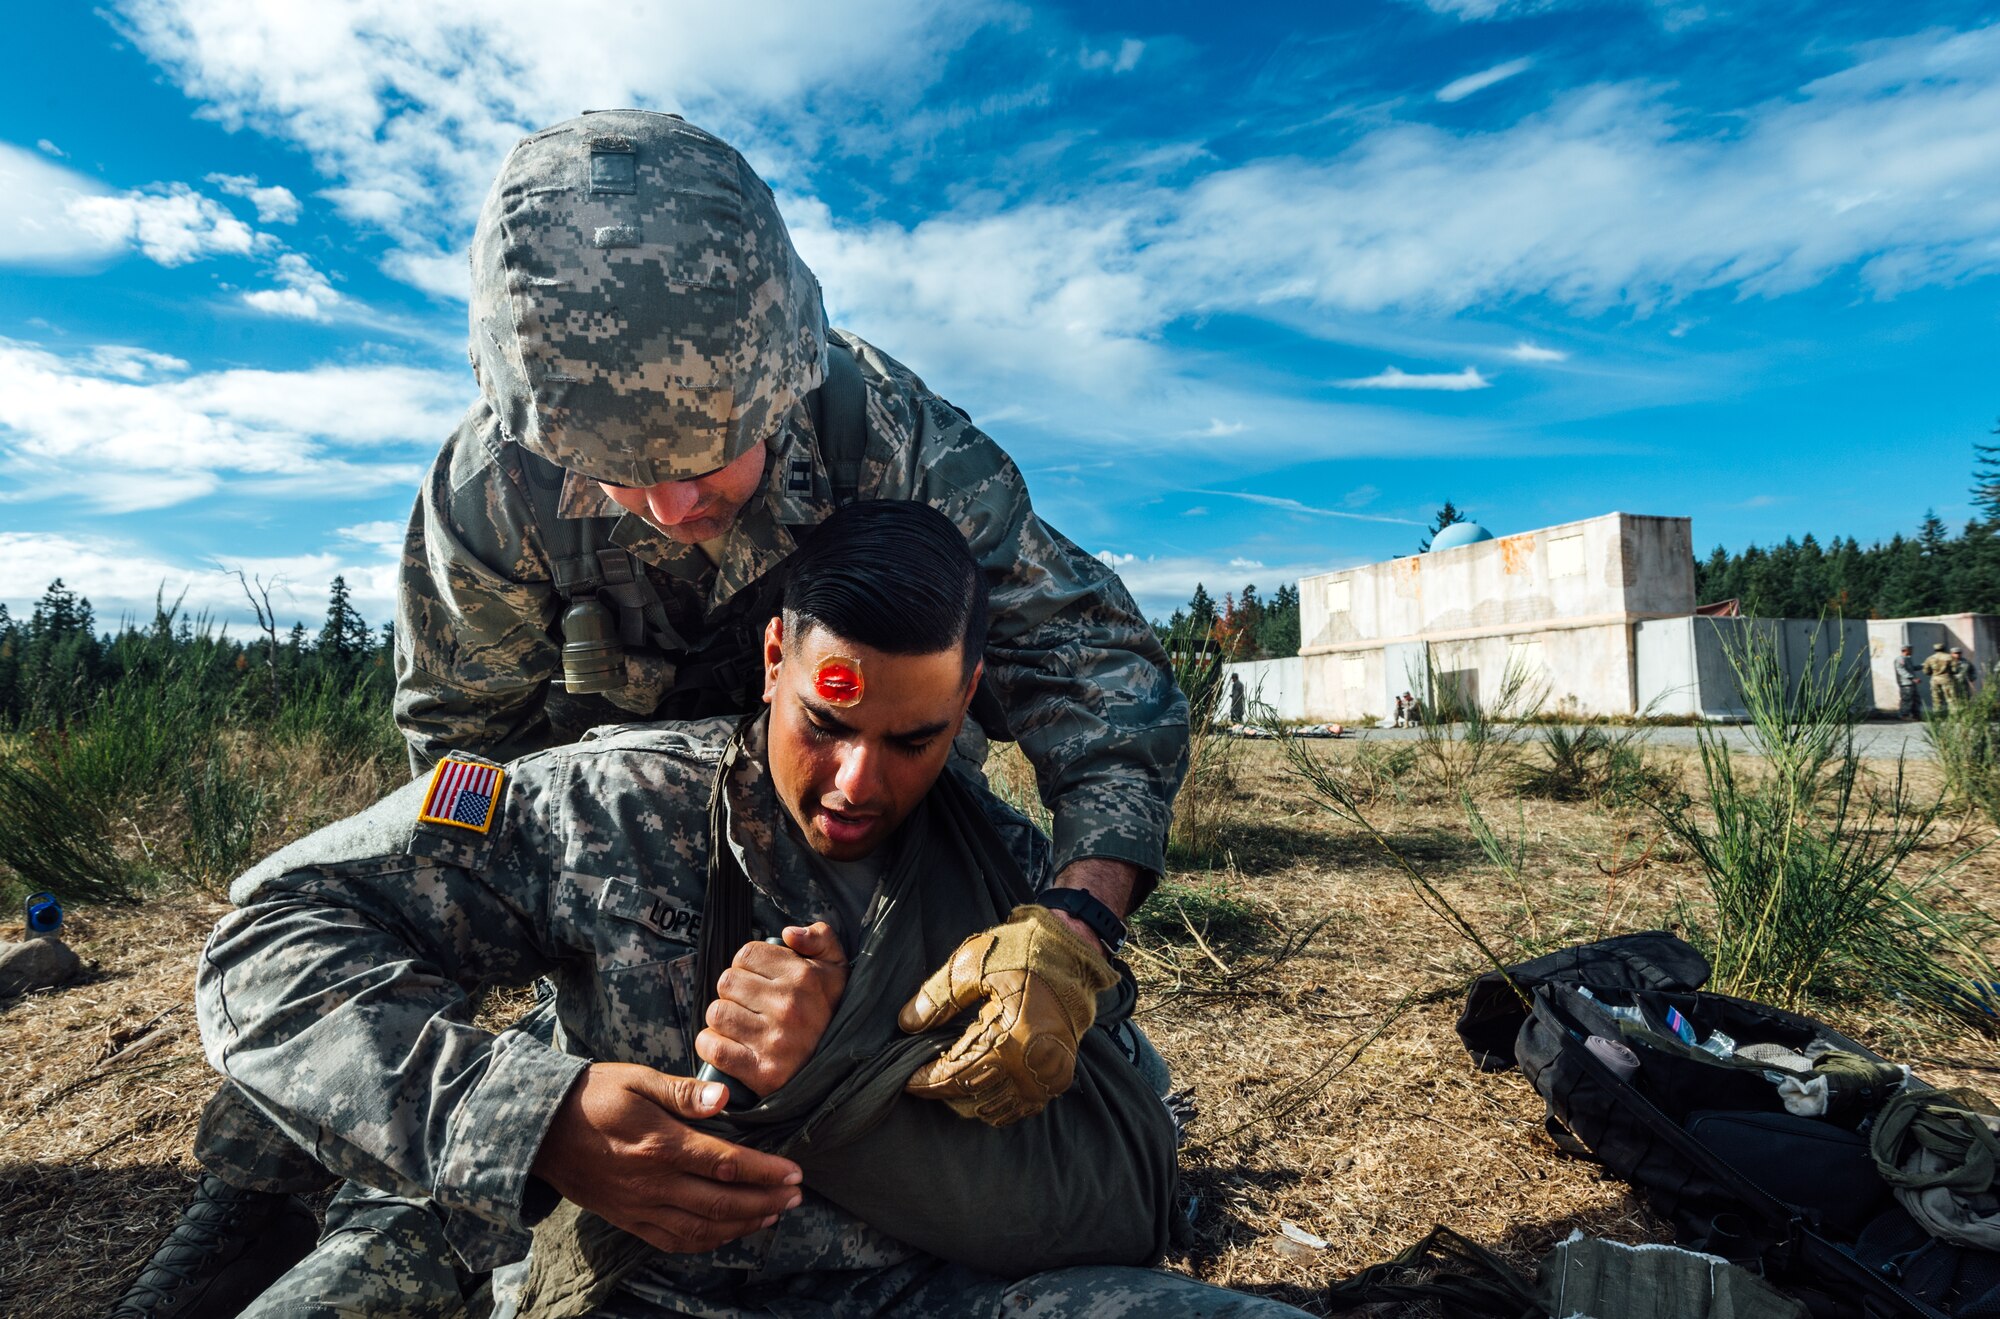 Capt. Jeffrey Mermilliod, 446th Aeromedical Staging Squadron Expert Field Medic Badge candidate, provides medical aid to a simulated causality during the EFMB course at Joint Base Lewis-McChord, Wash., Sept. 23, 2015. The EFMB is the non-combat equivalent of the Combat Medical Badge and is awarded to medical personnel of the U.S. military who successfully complete a set of qualification tests. (U.S. Air Force photo by Senior Airman Jordan Castelan/Released)